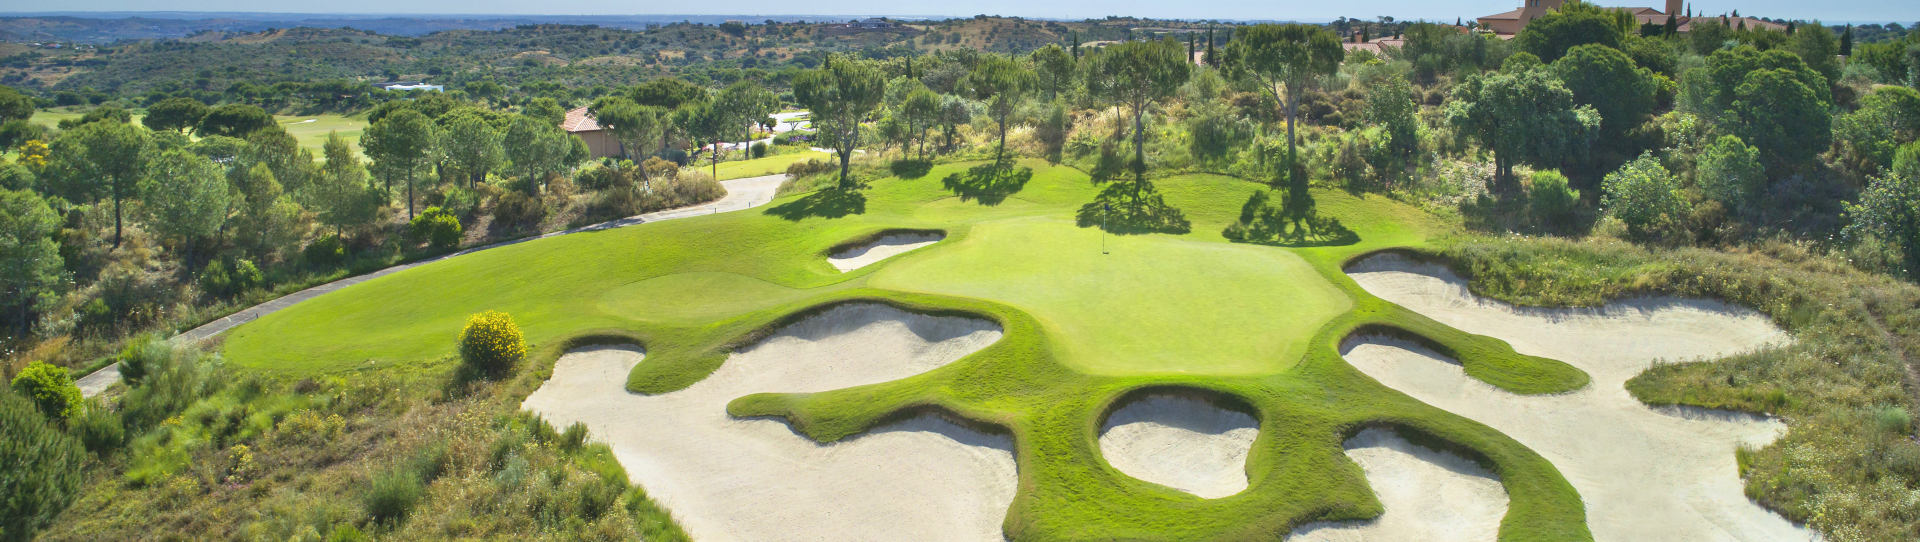 Portugal golf competitions - Tee Times Prestige Tournament 2022 - Photo 3